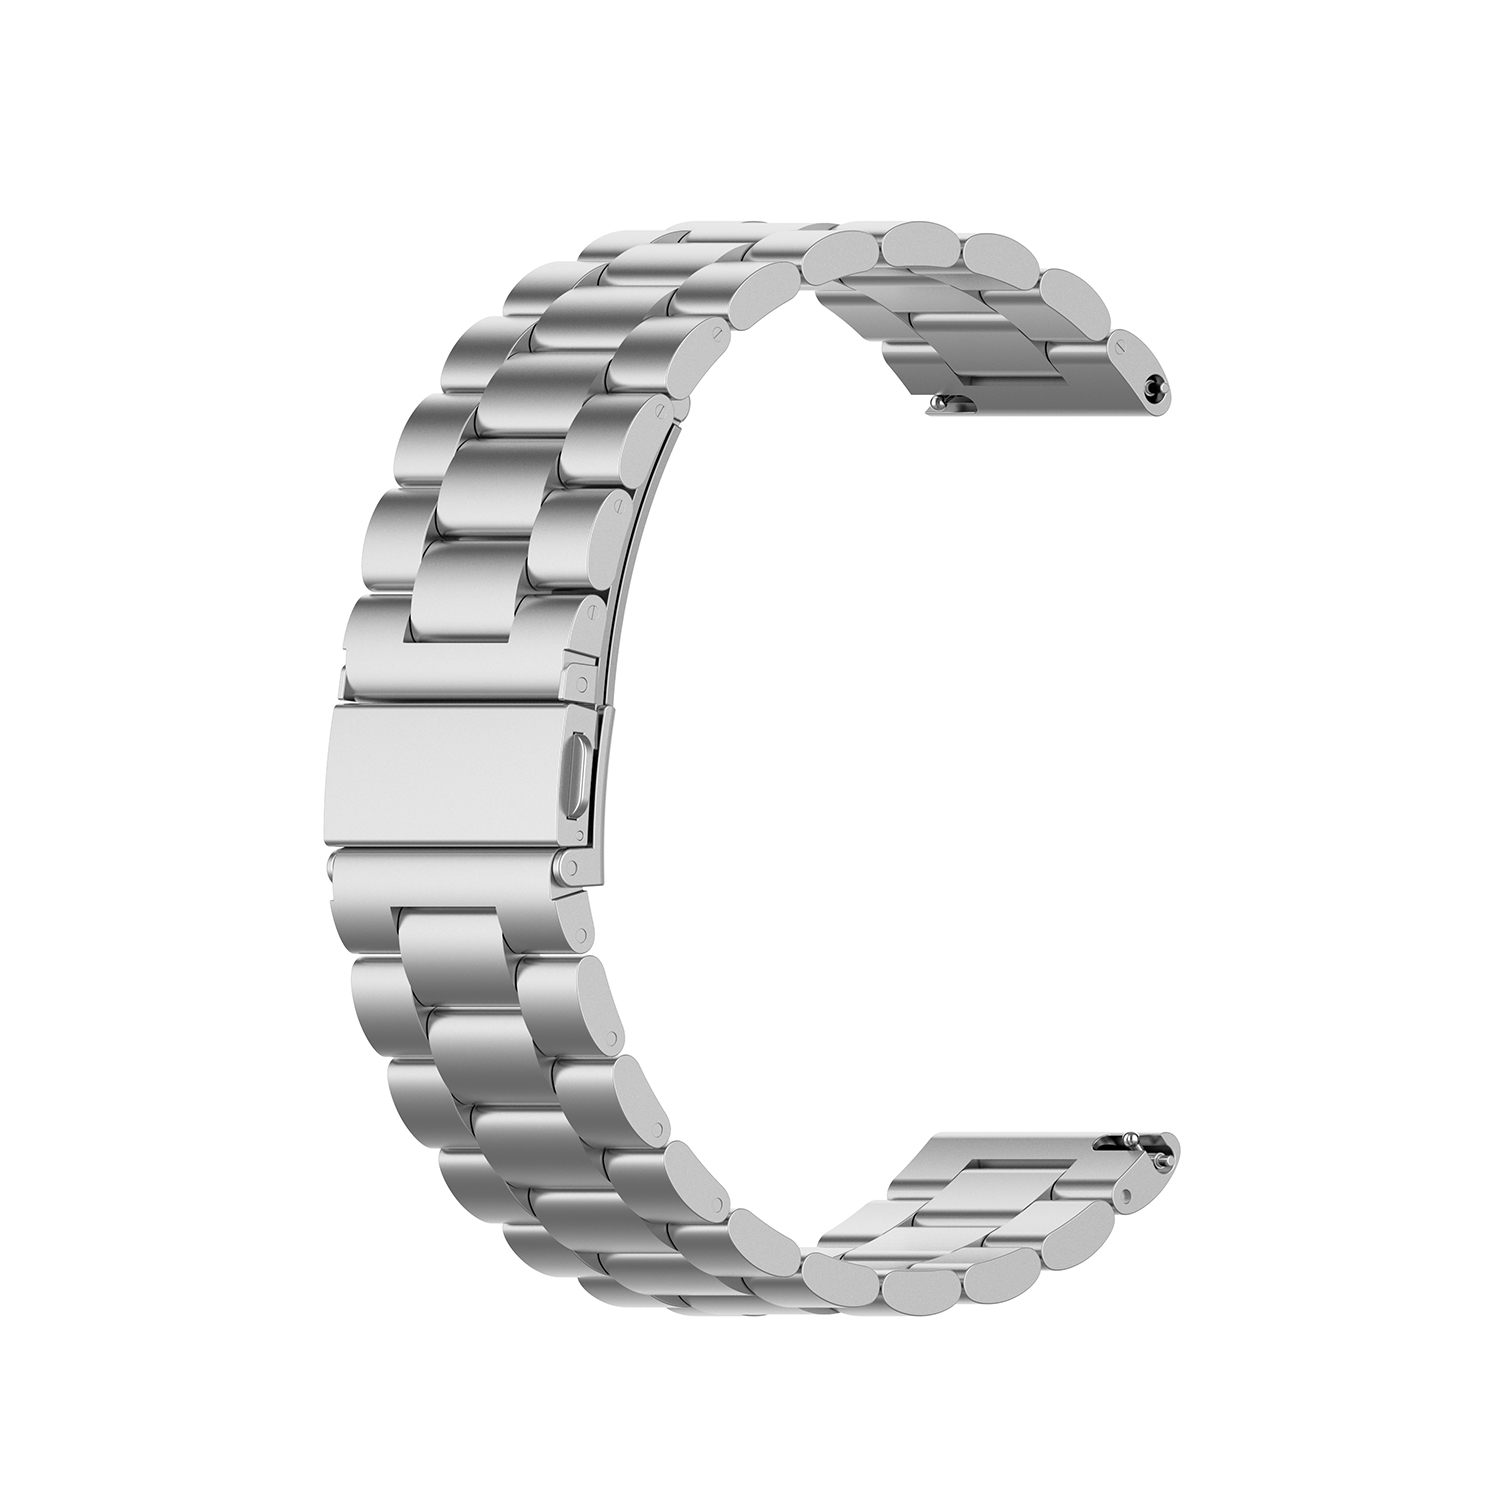 Bakeey-2022mm-Width-Universal-Bussiness-Stainless-Steel-Watch-Band-Strap-Replacement-for-Samsung-Gal-1734811-12